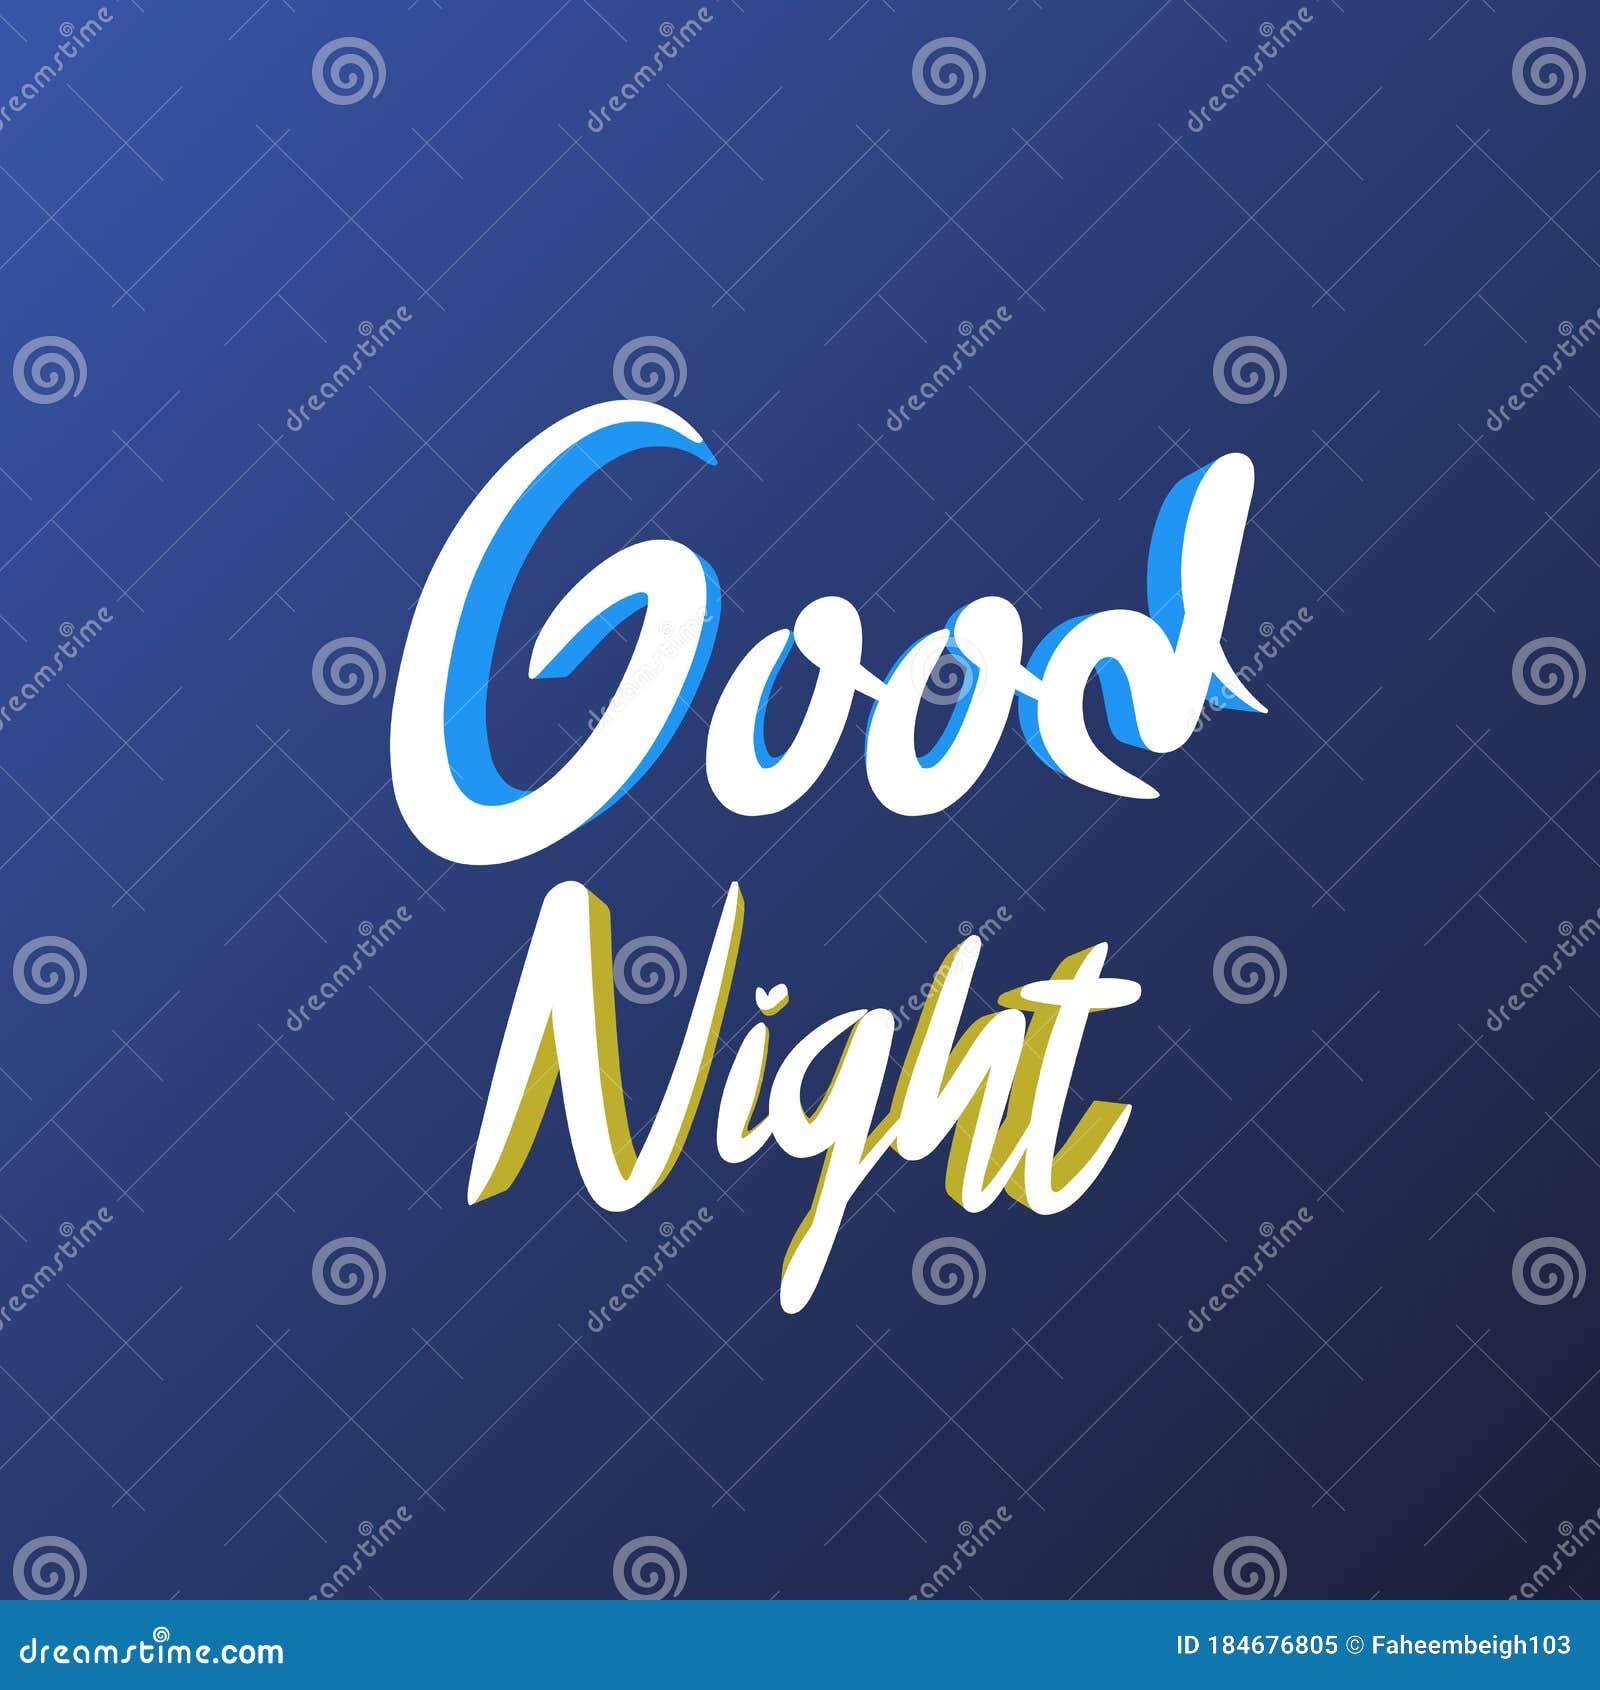 Good Night Colorful Poster Over Dark Background. Stock Illustration ...